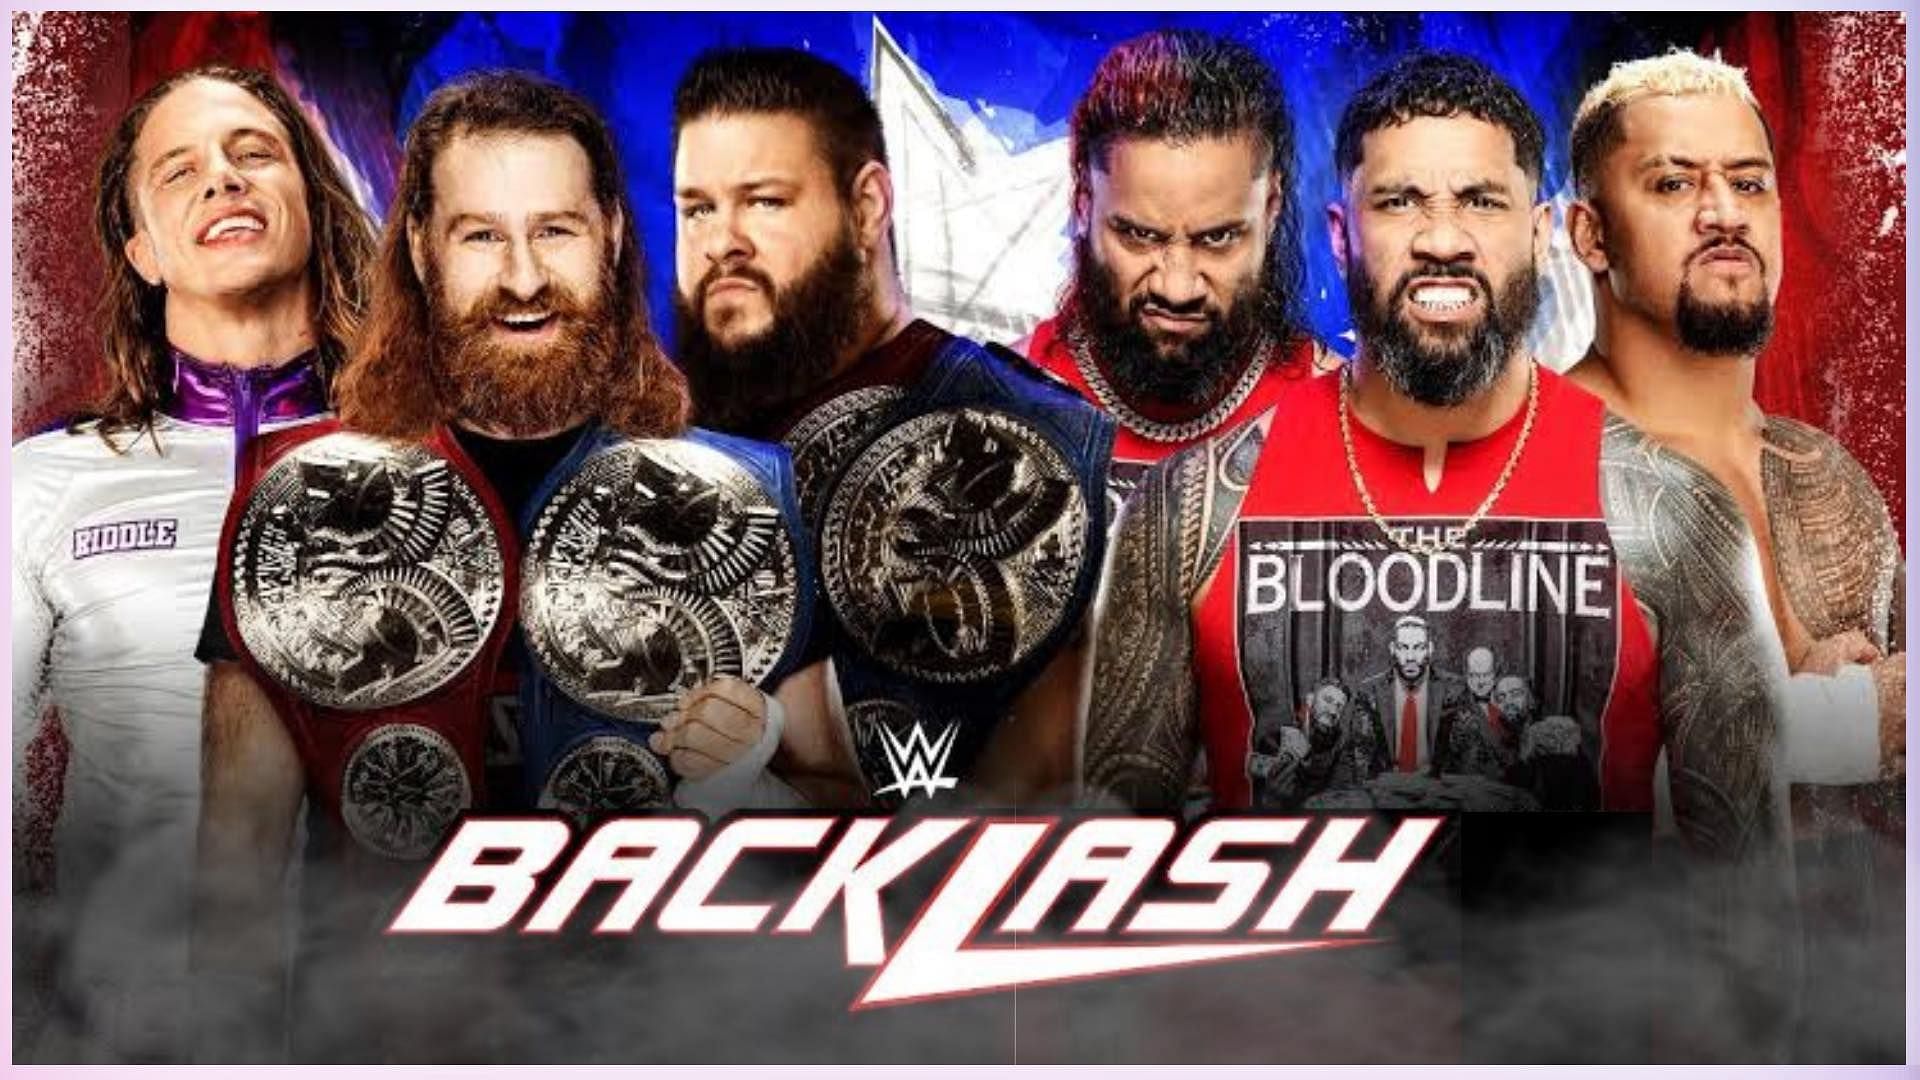 A major six-man tag team match is scheduled for WWE Backlash